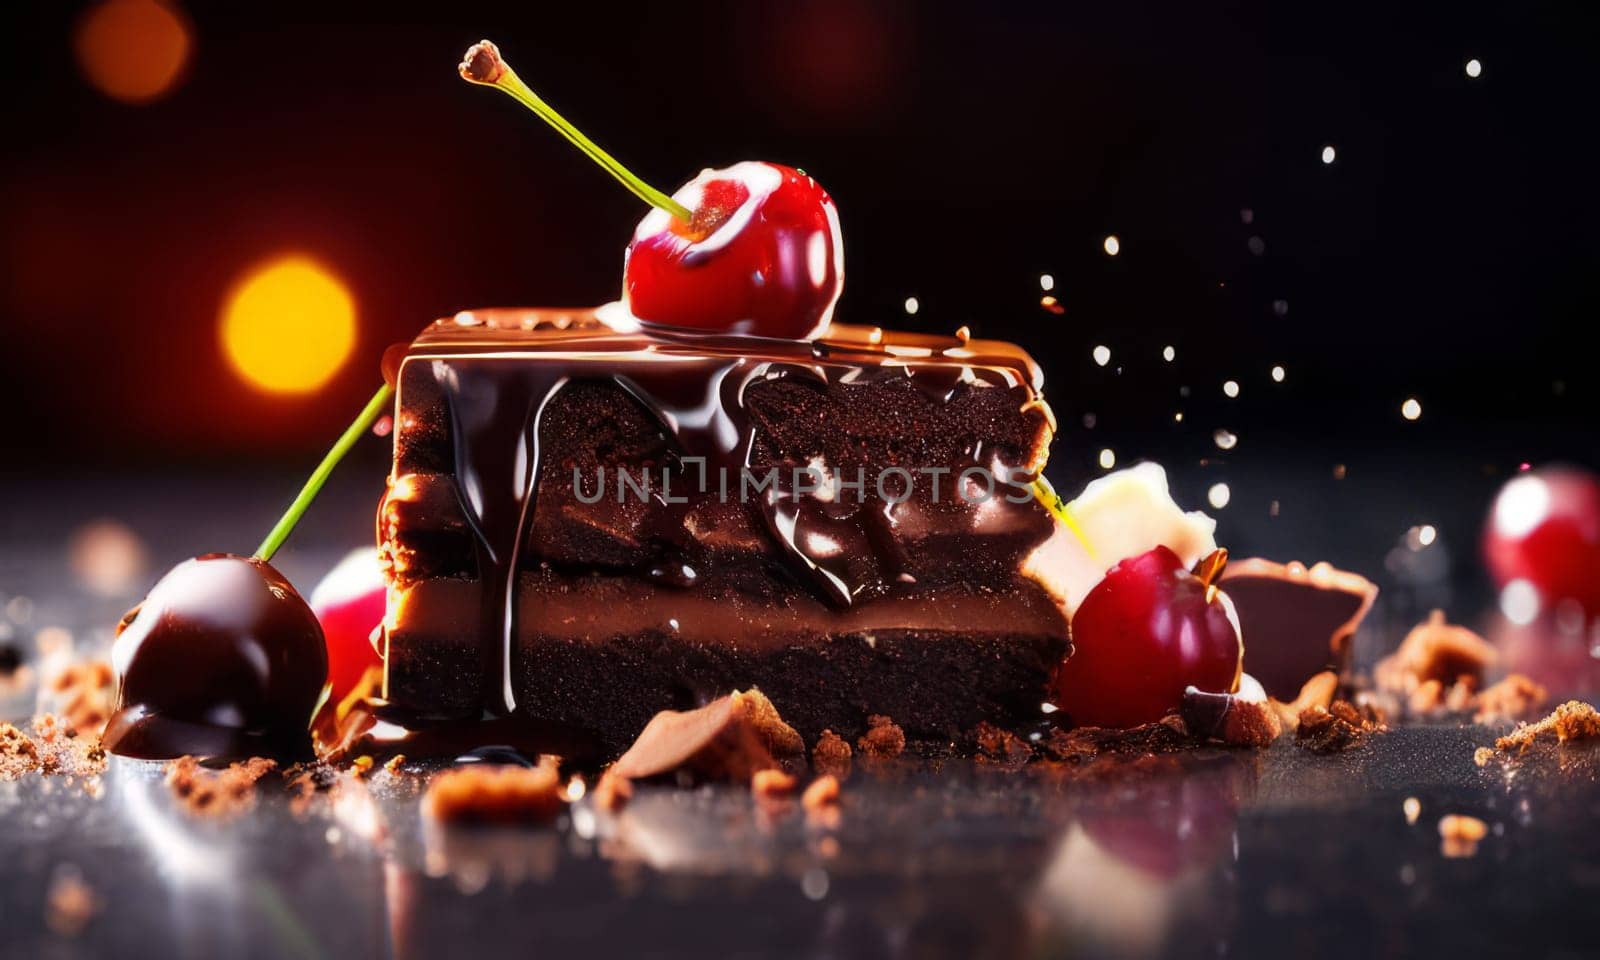 Decadent chocolate cake topped with luscious cherries, drizzled with rich chocolate sauce. For creating recipes on culinary websites, blogs, promoting food products on social media platforms. by Angelsmoon